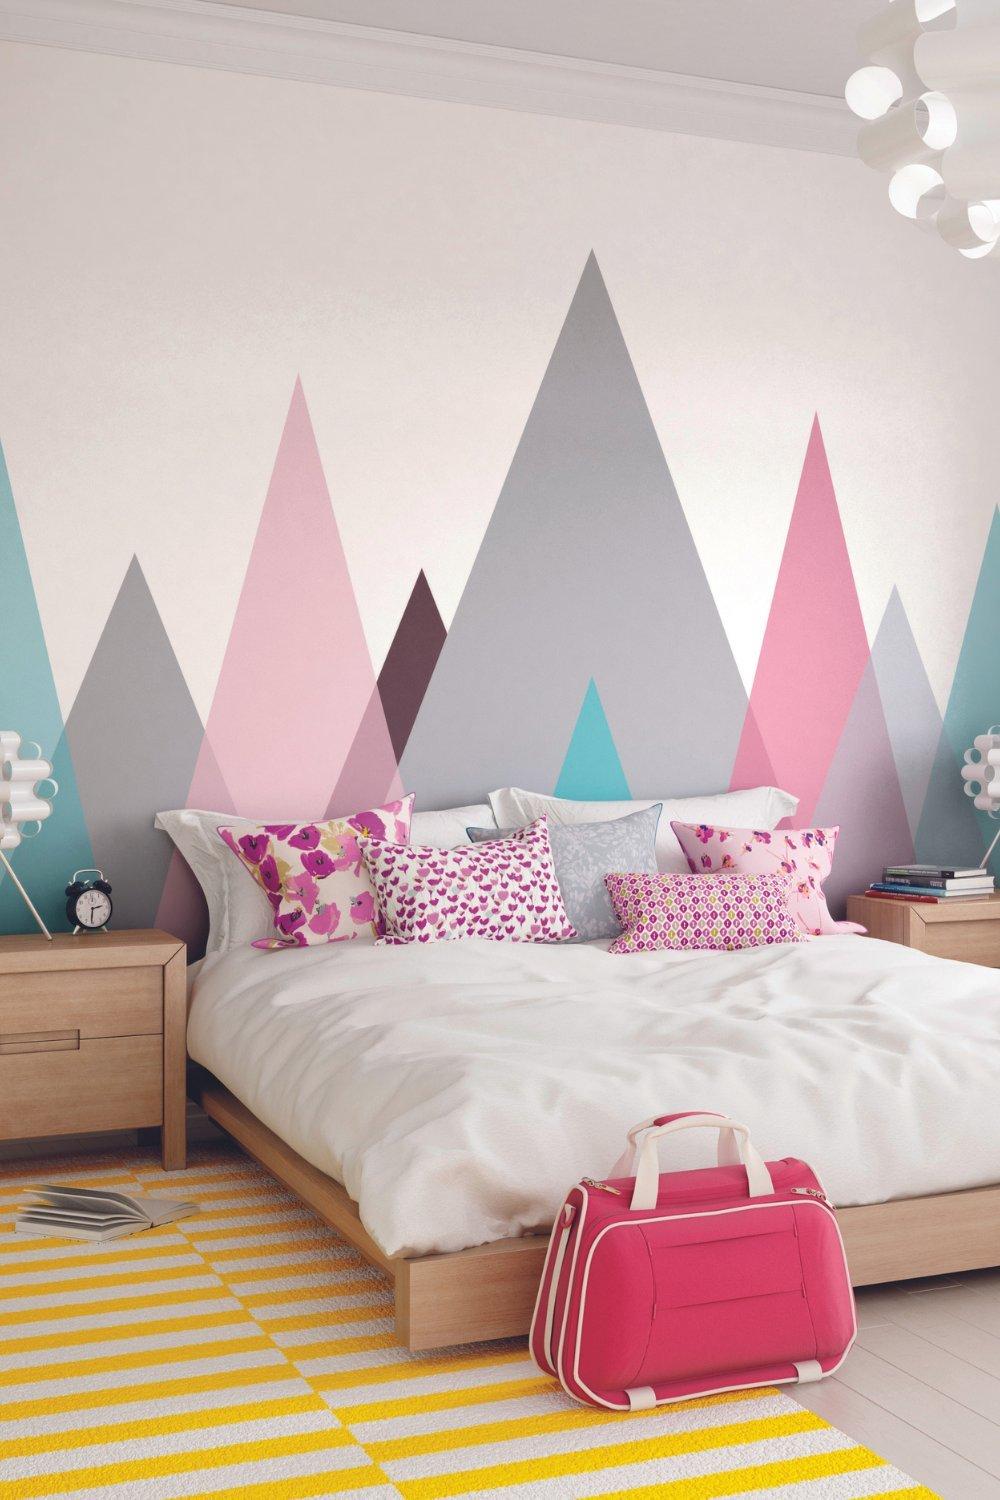 Abstract Mountains Matt Smooth Paste the Wall Mural 300cm wide x 240cm high